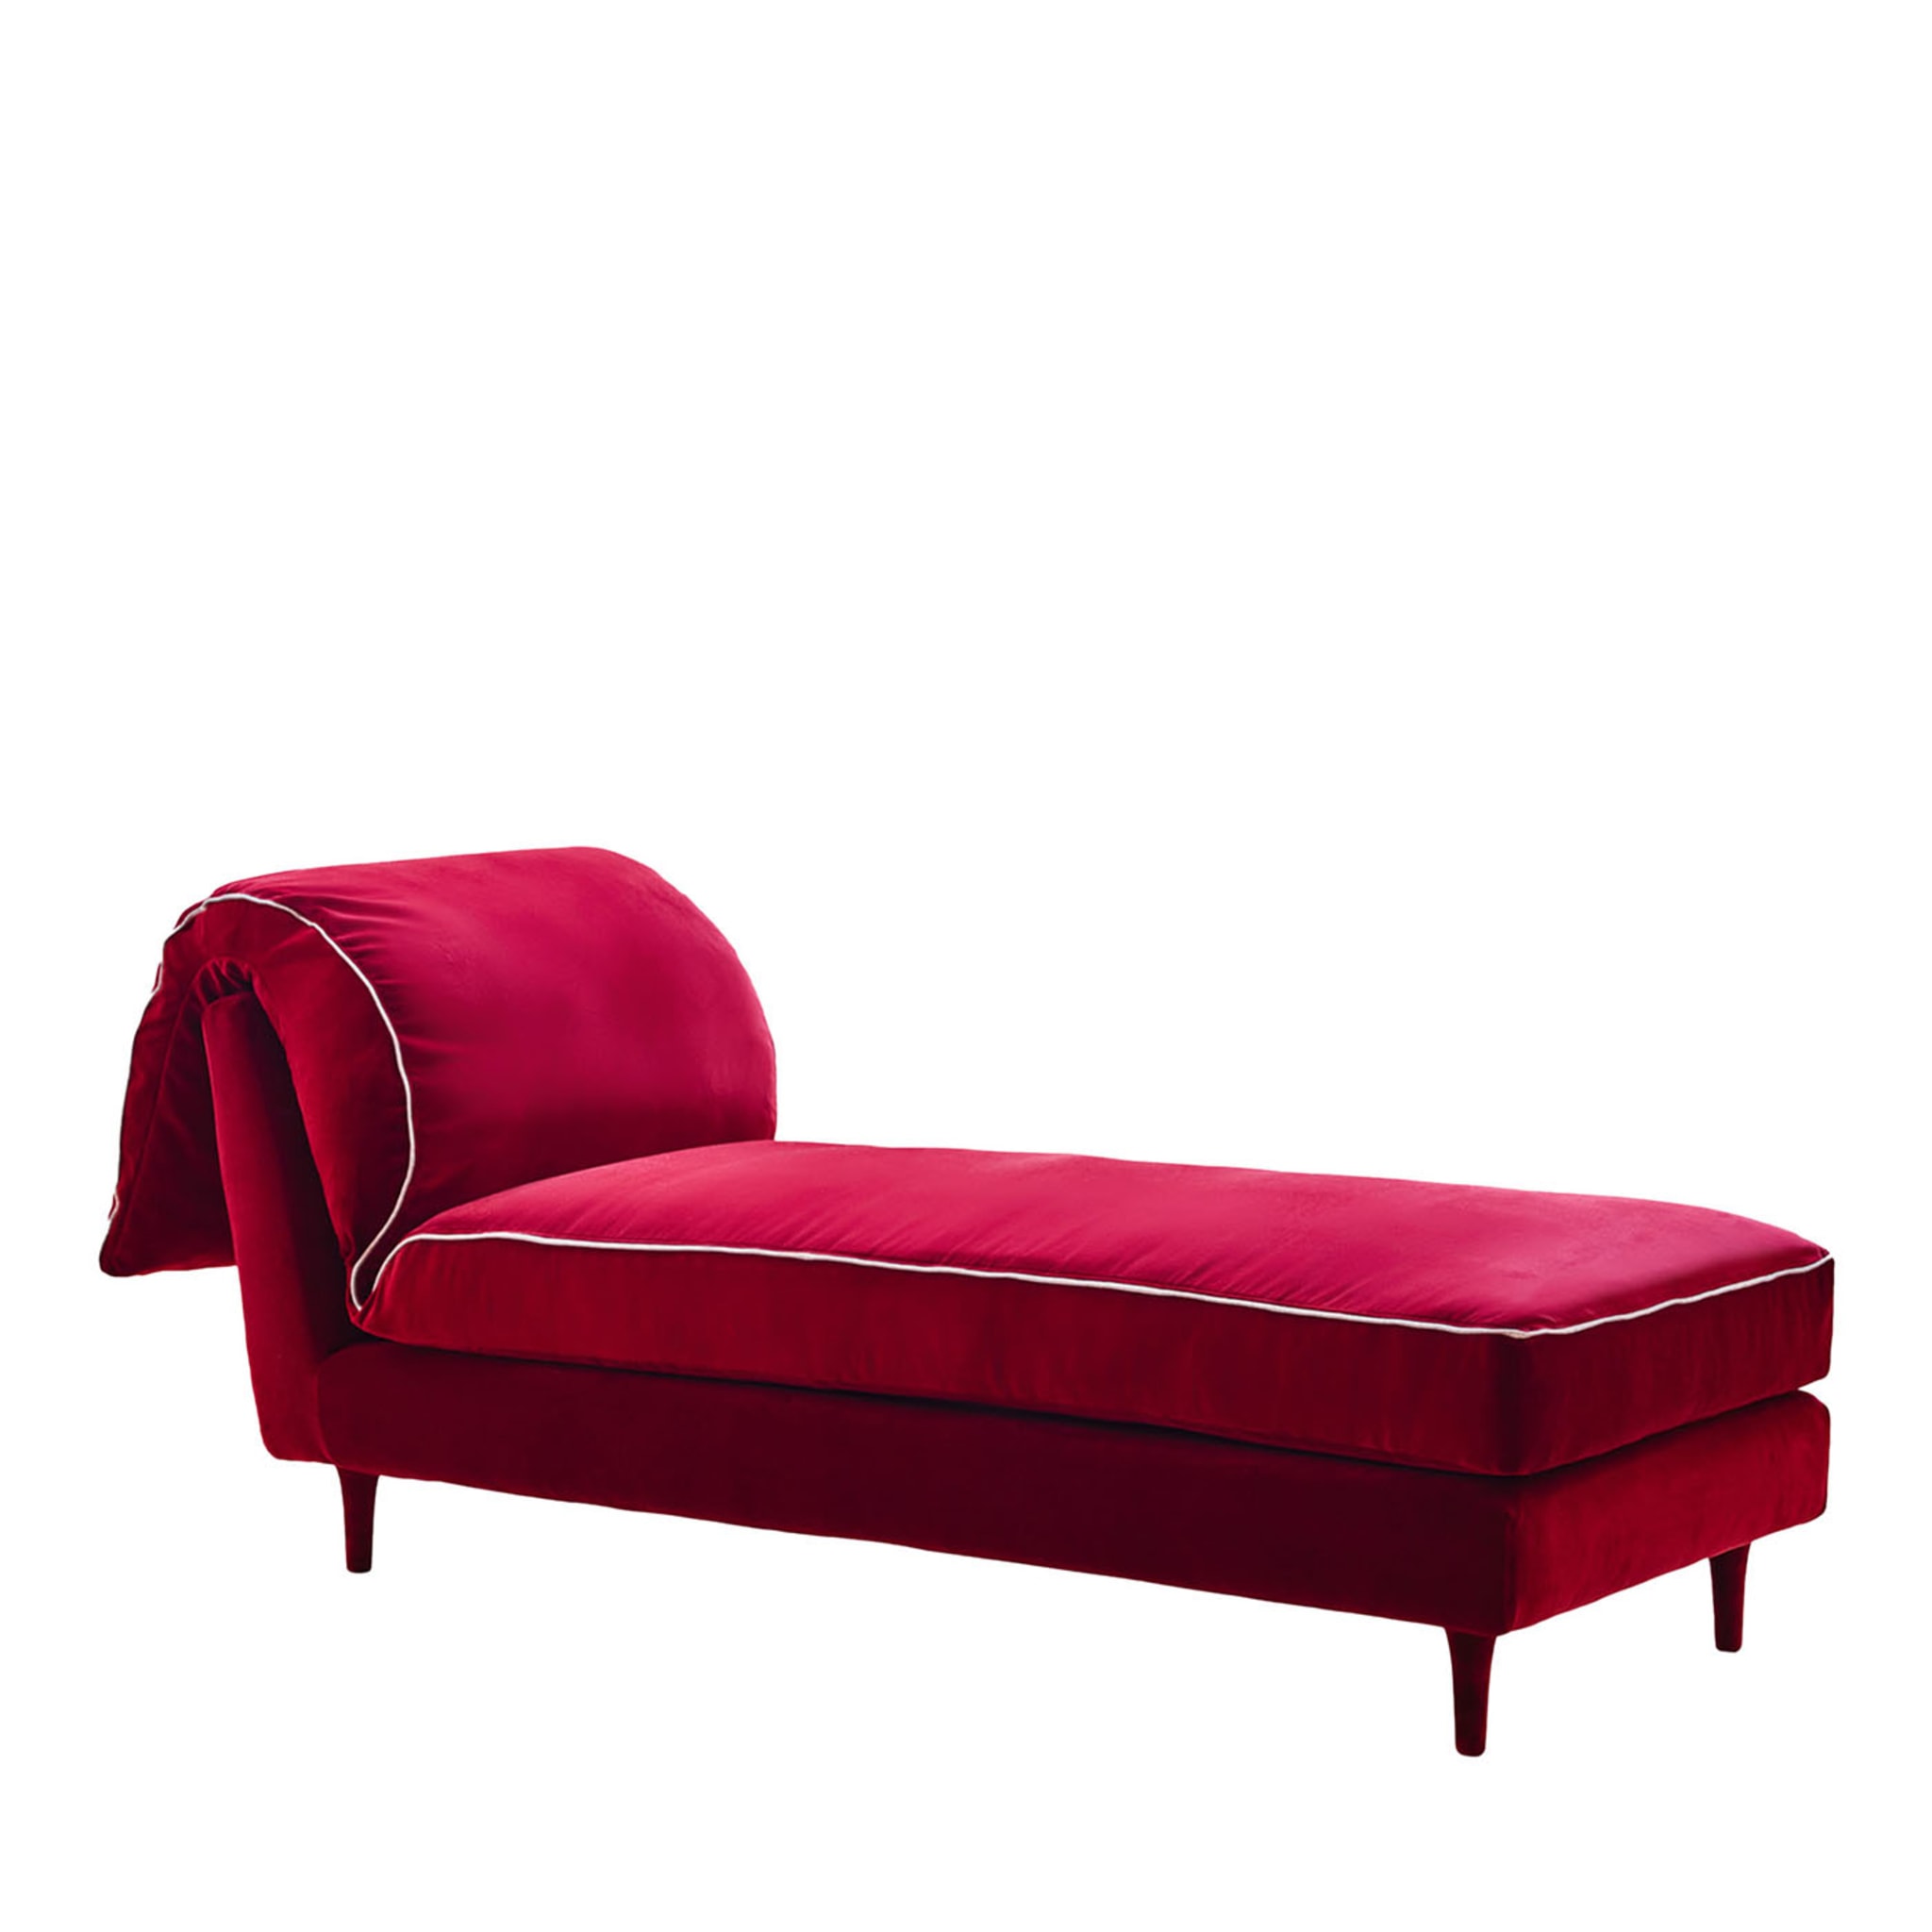 Casquet Red Passion Velvet Daybed - Main view